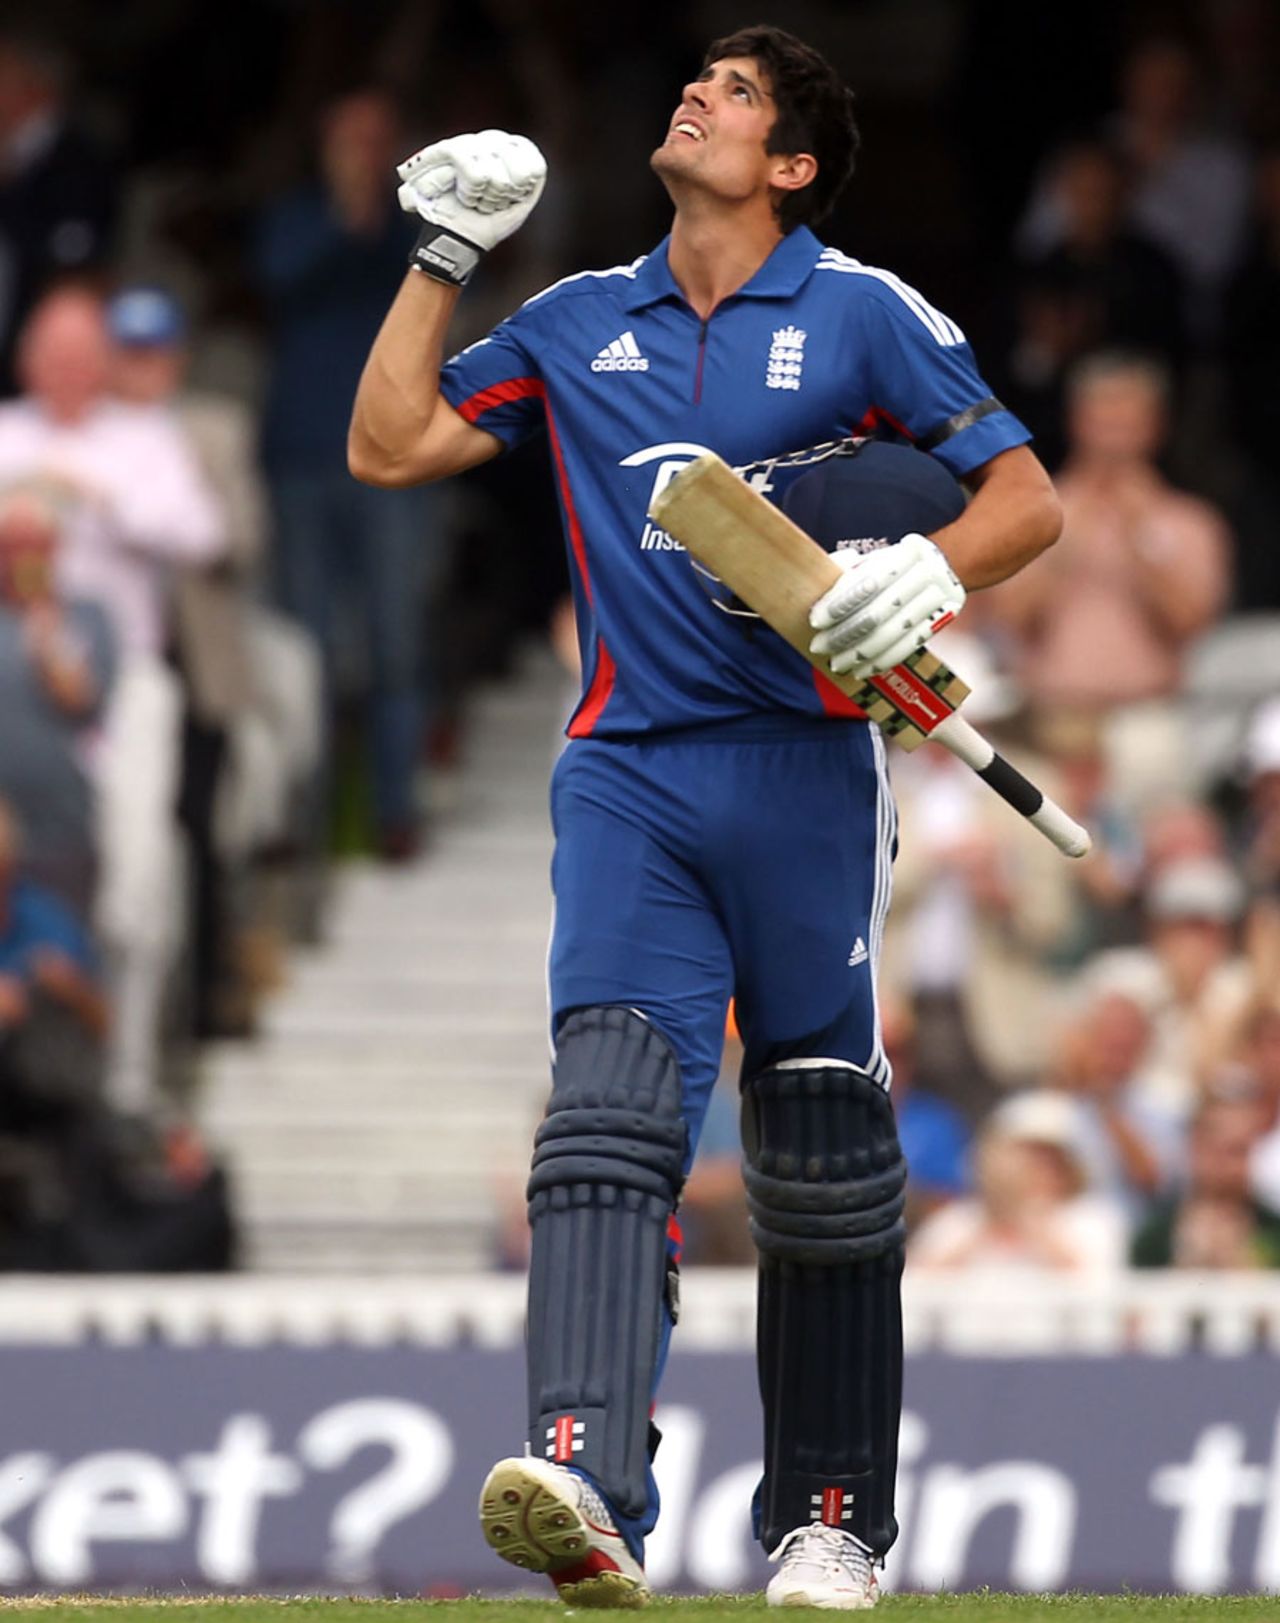 Alastair Cook looks heaven-ward as he reaches a 114-ball century, England v West Indies, 2nd ODI, The Oval, June 19, 2012